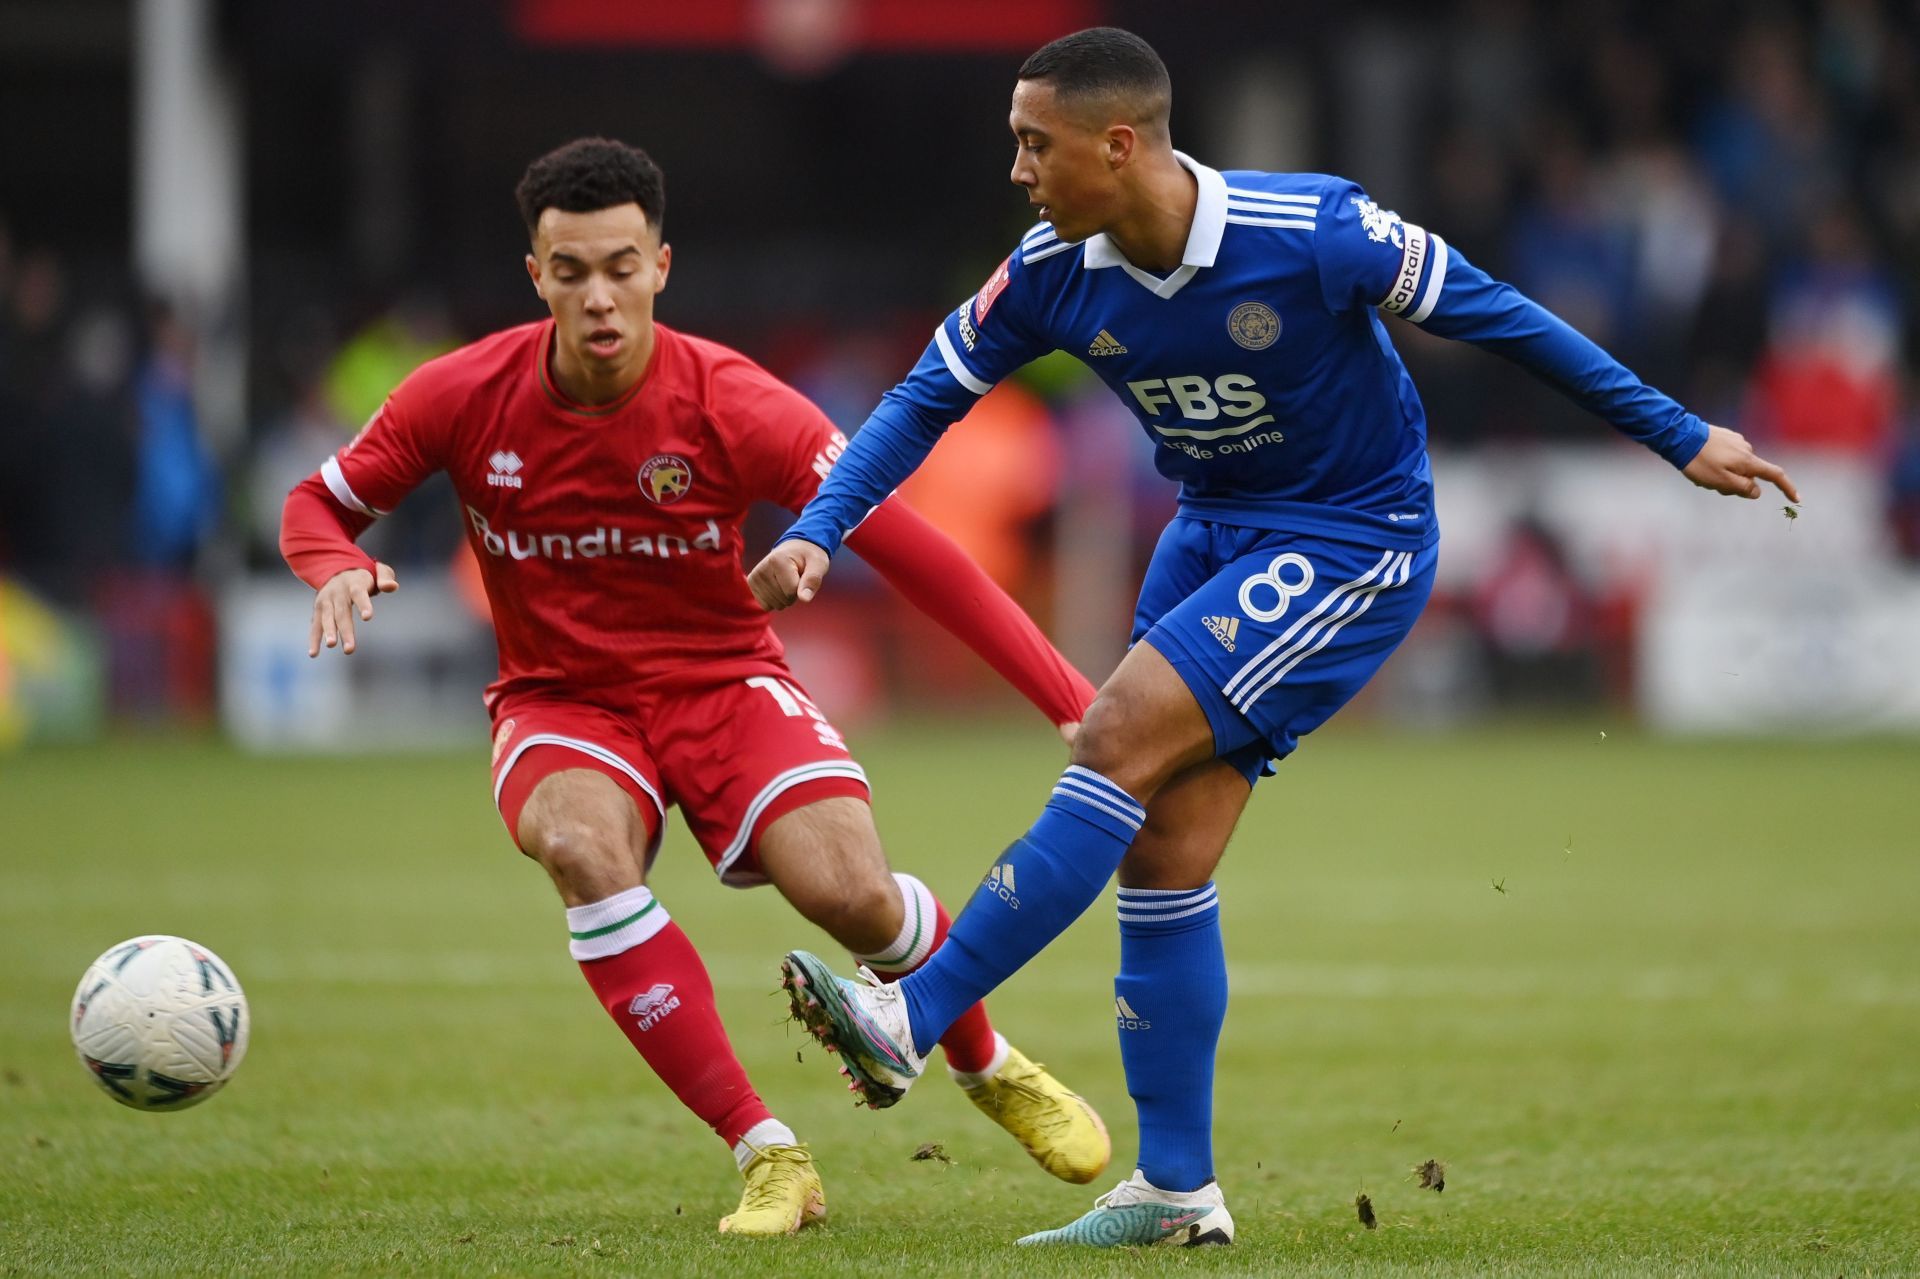 Walsall v Leicester City: Emirates FA Cup Fourth Round